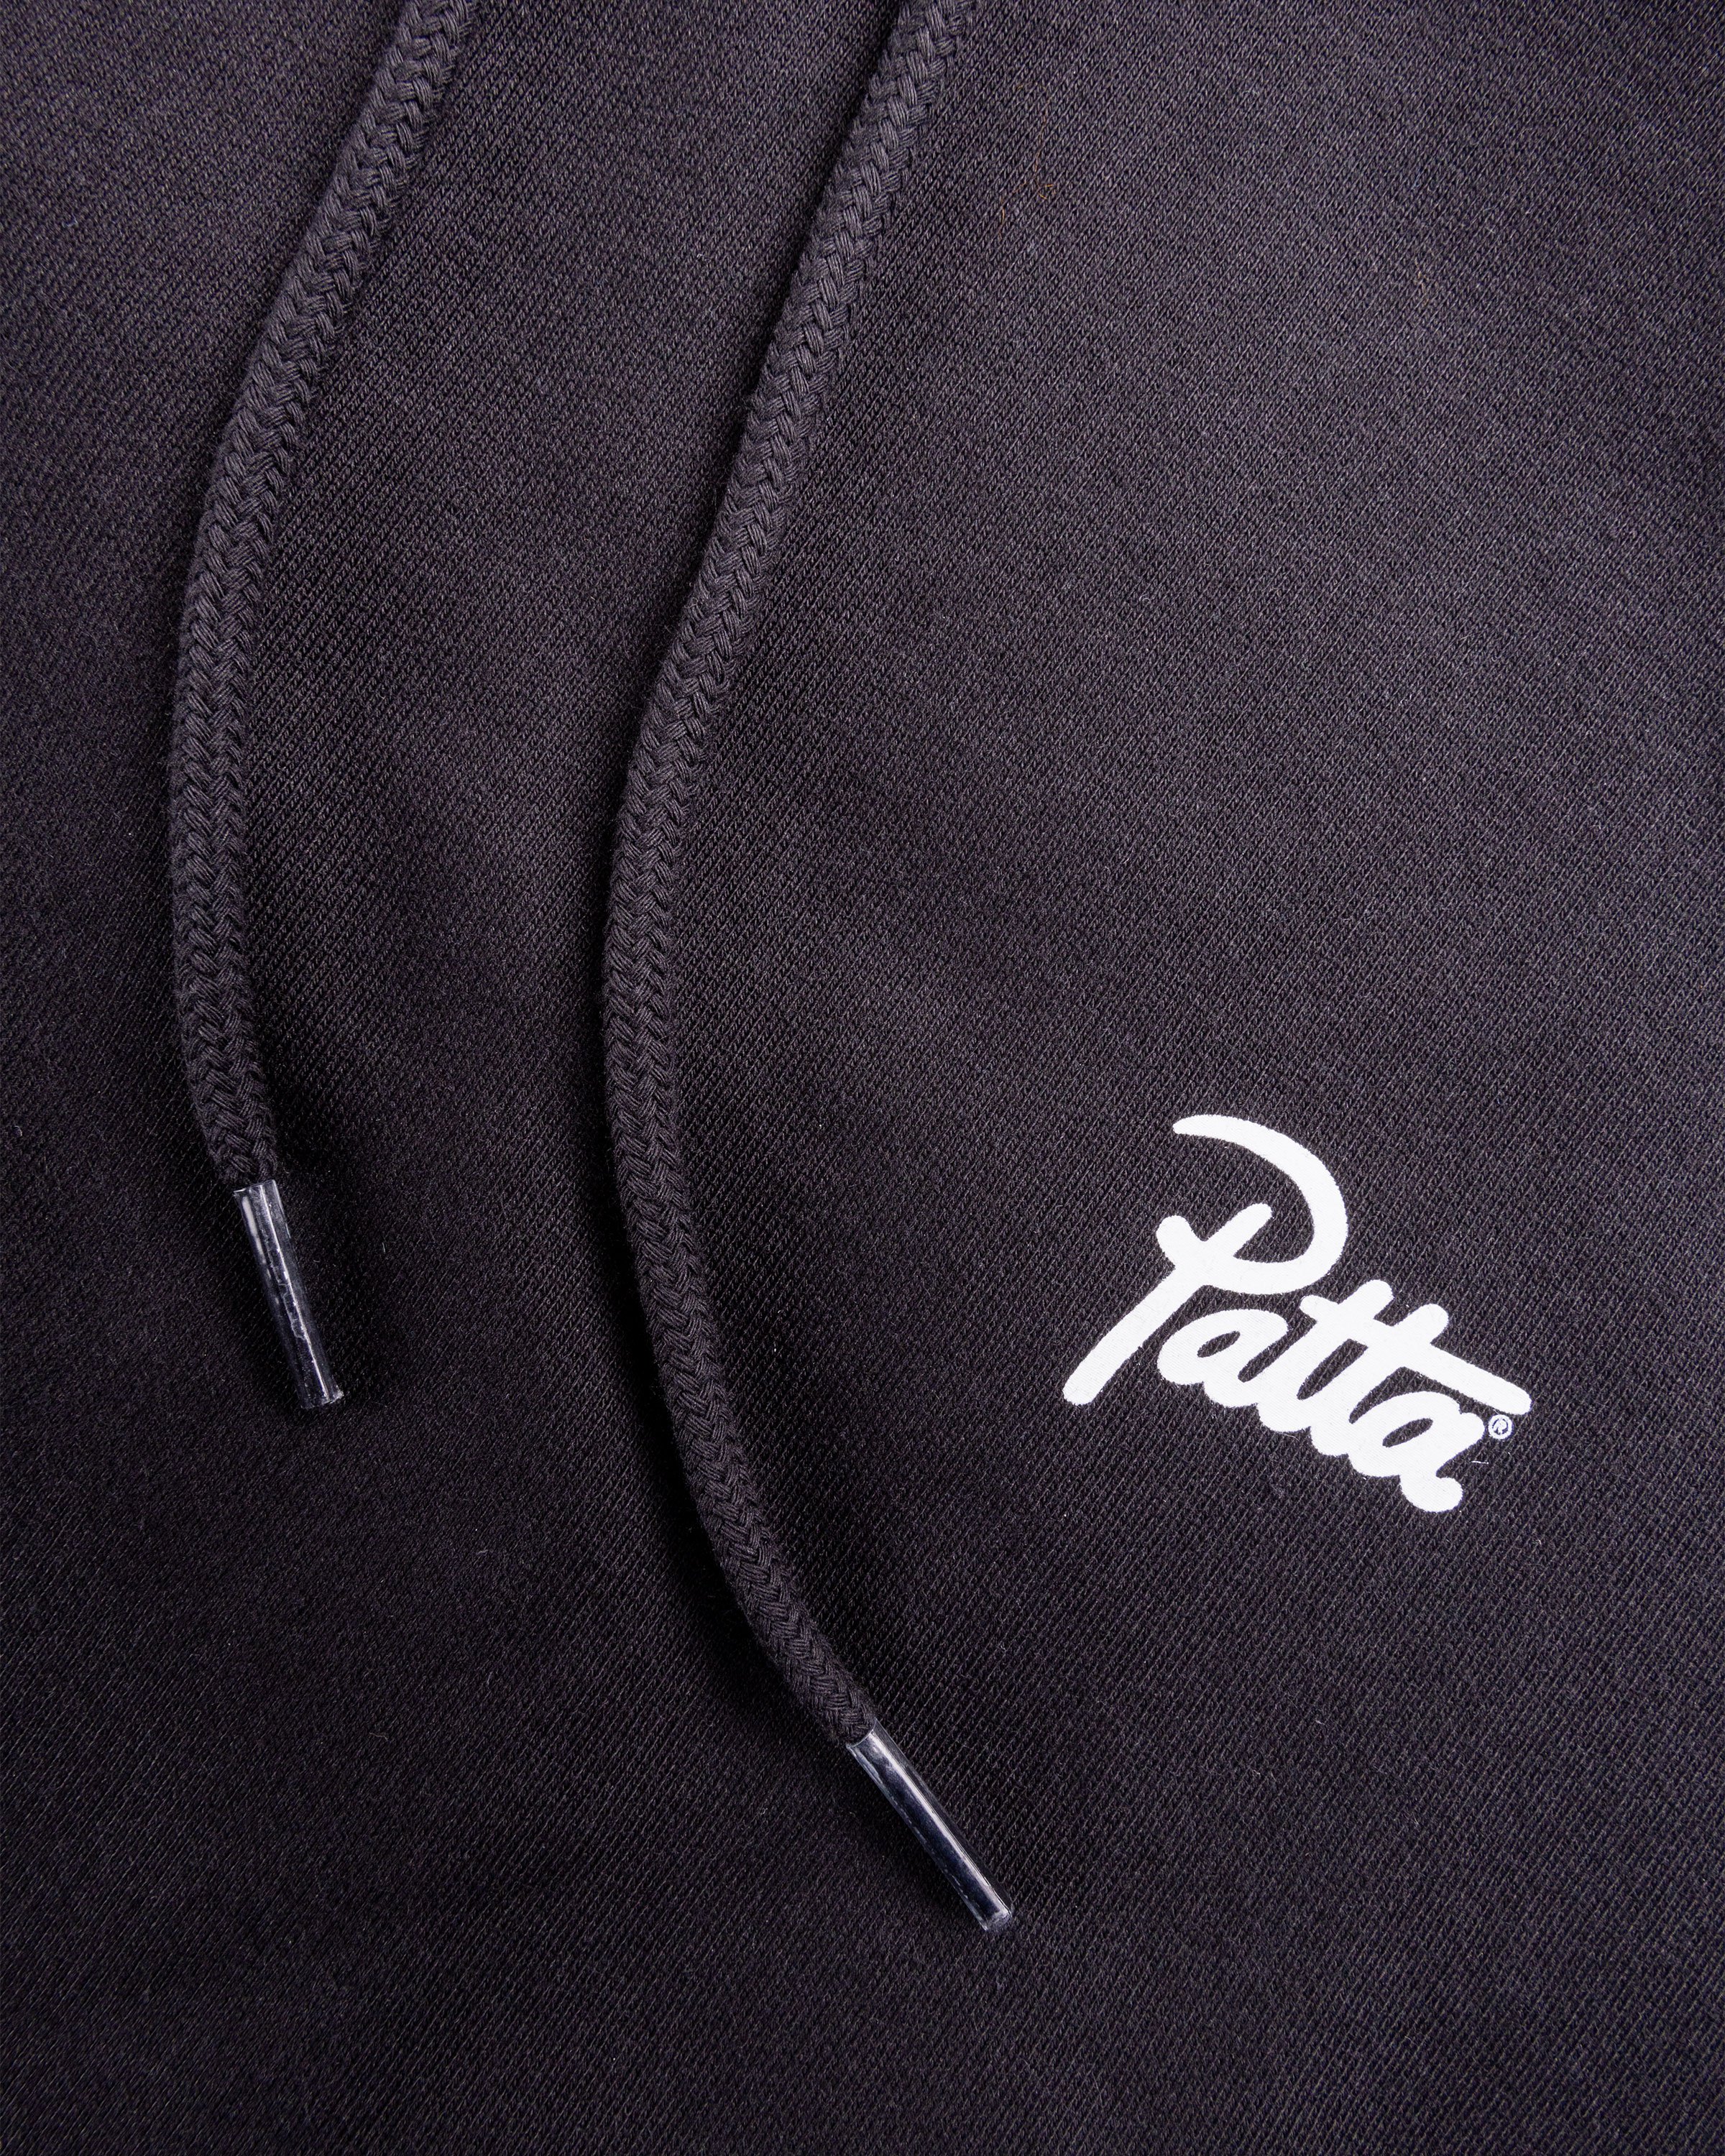 Patta - Some Like It Hot Classic Hooded Sweater Black - Clothing - Black - Image 7